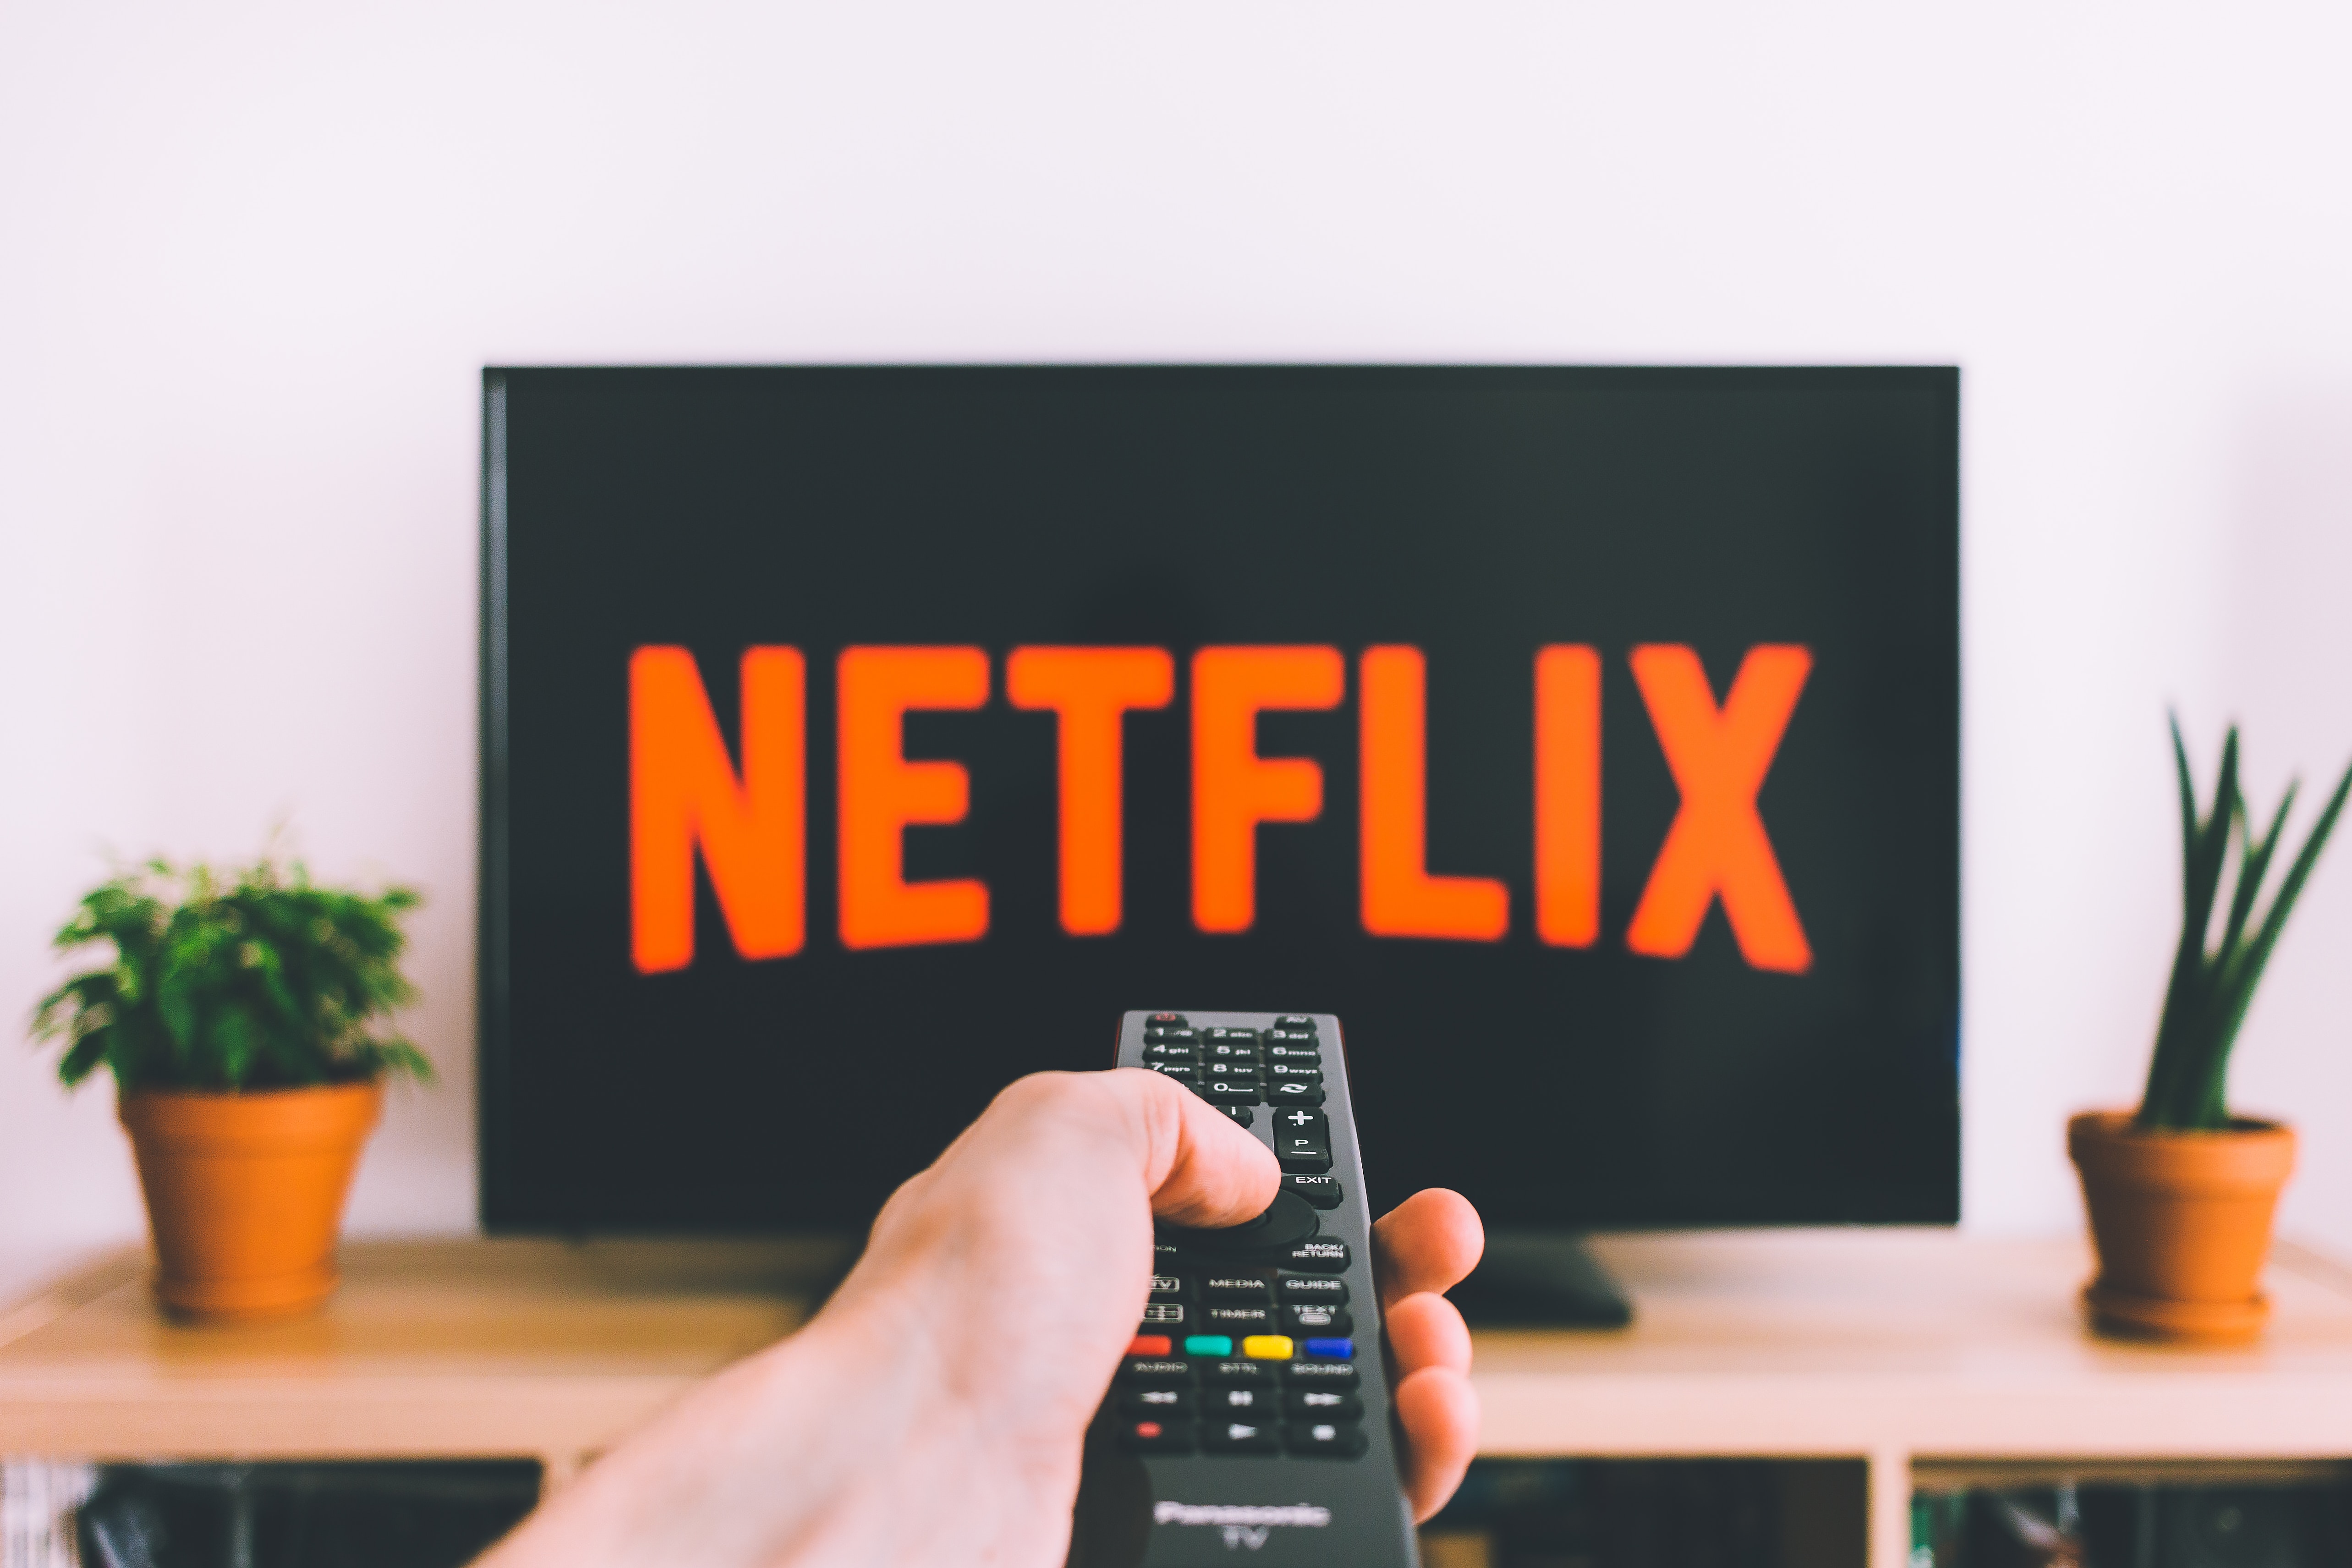 Netflix UK revenues hit an estimated £1bn, but will the company start paying any corporation tax?